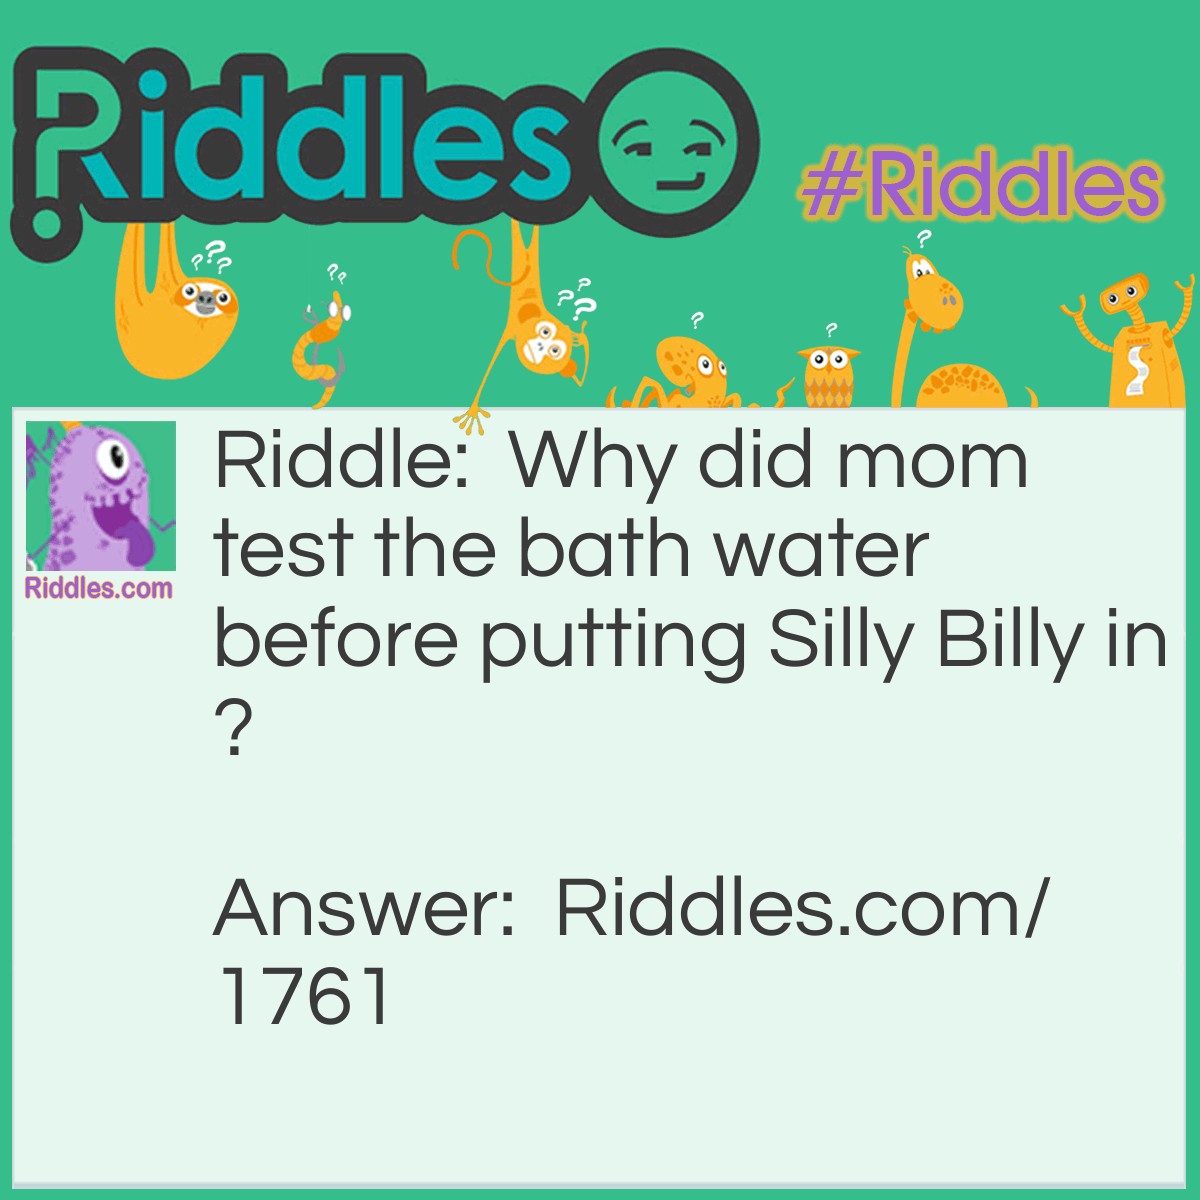 Riddle: Why did mom test the bath water before putting Silly Billy in? Answer: To prevent son-burn.